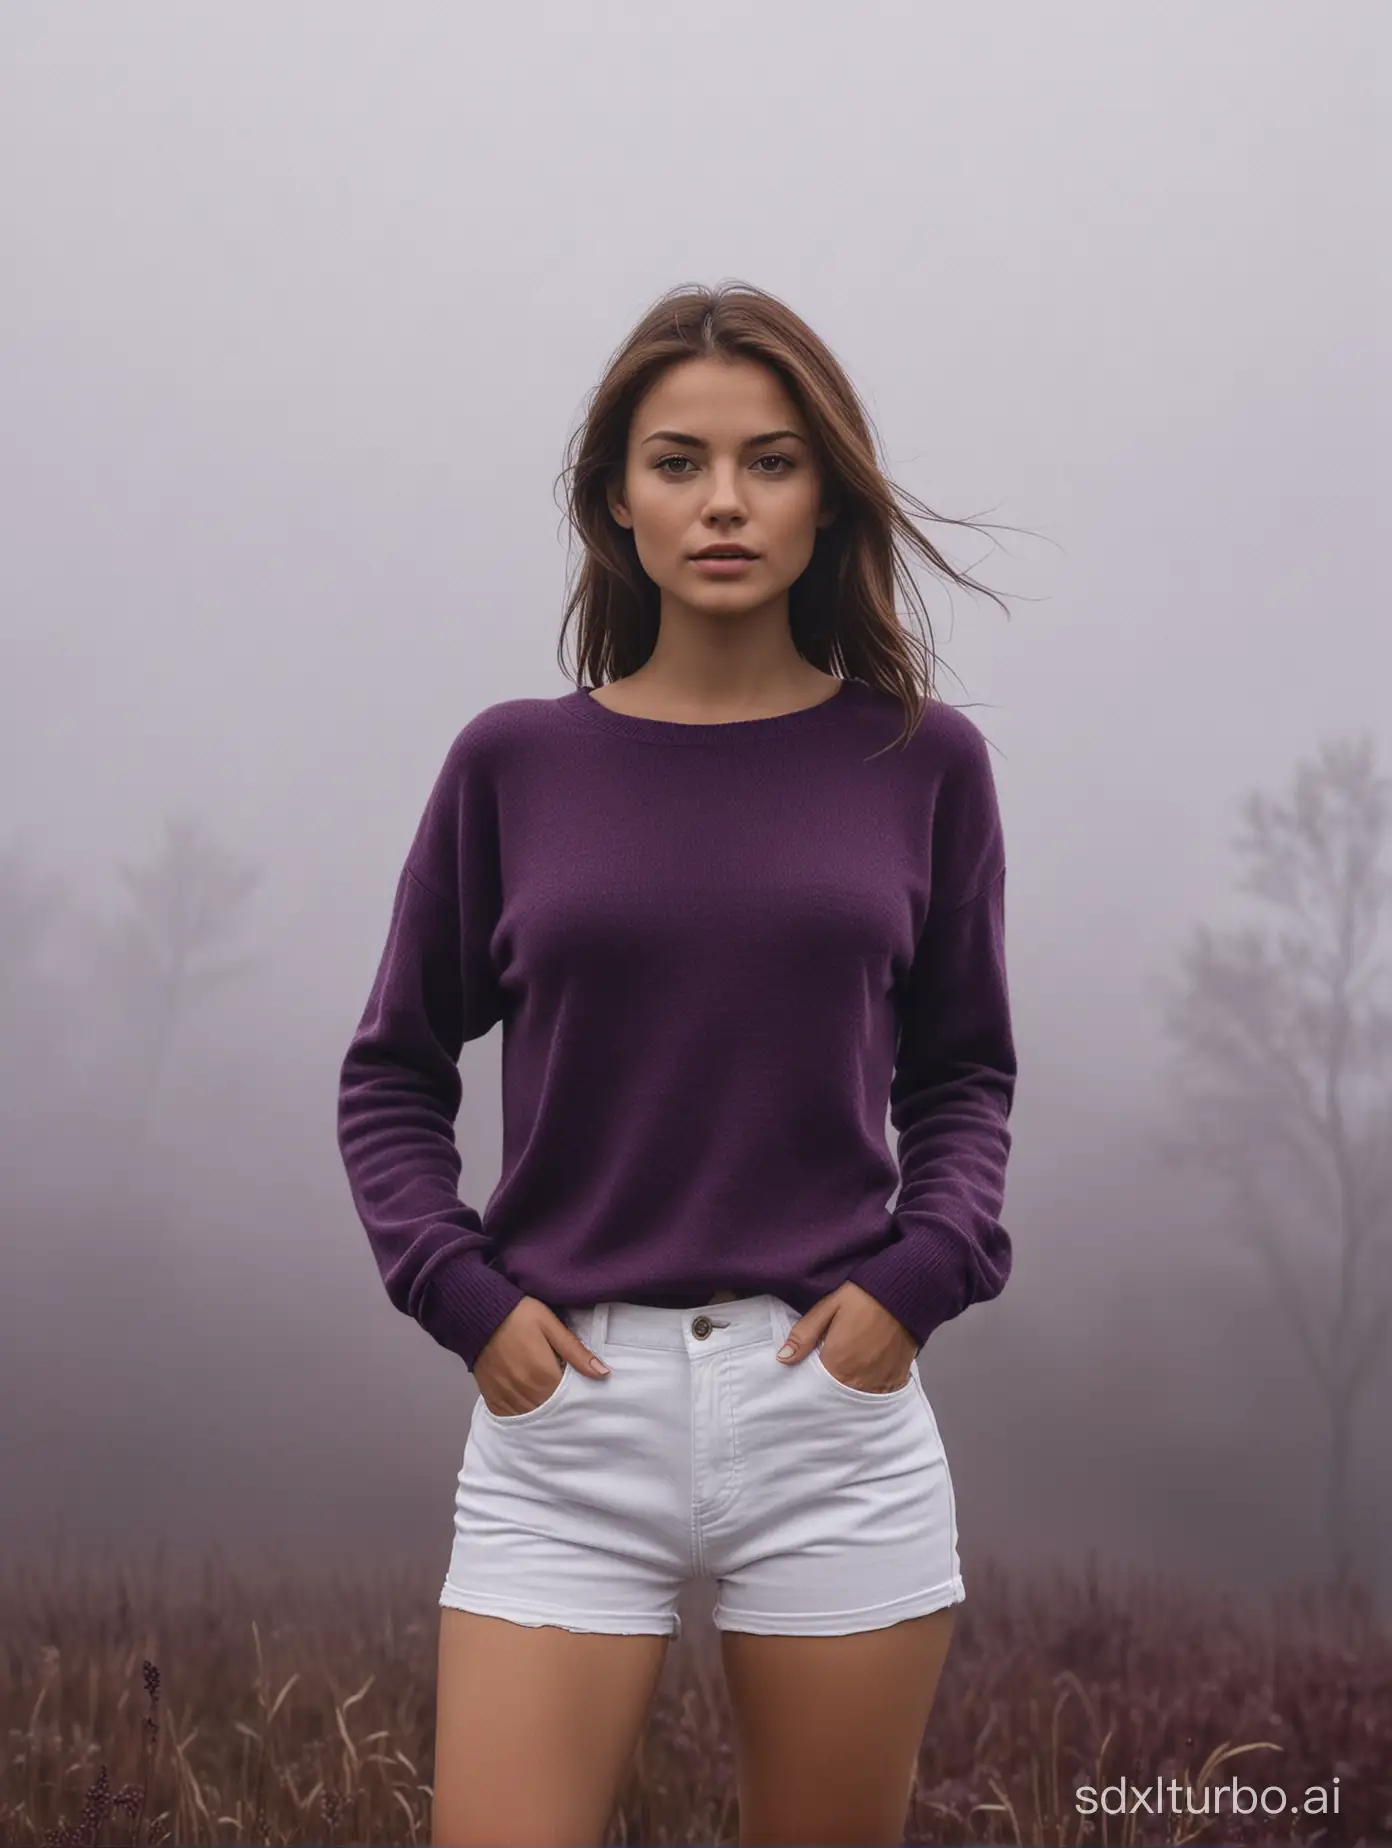 medium brown haired woman, slim body, small breast, wearing a dark purple sweater and a white short pants, standing on a higher ground, background below is a foggy clearing, realistic